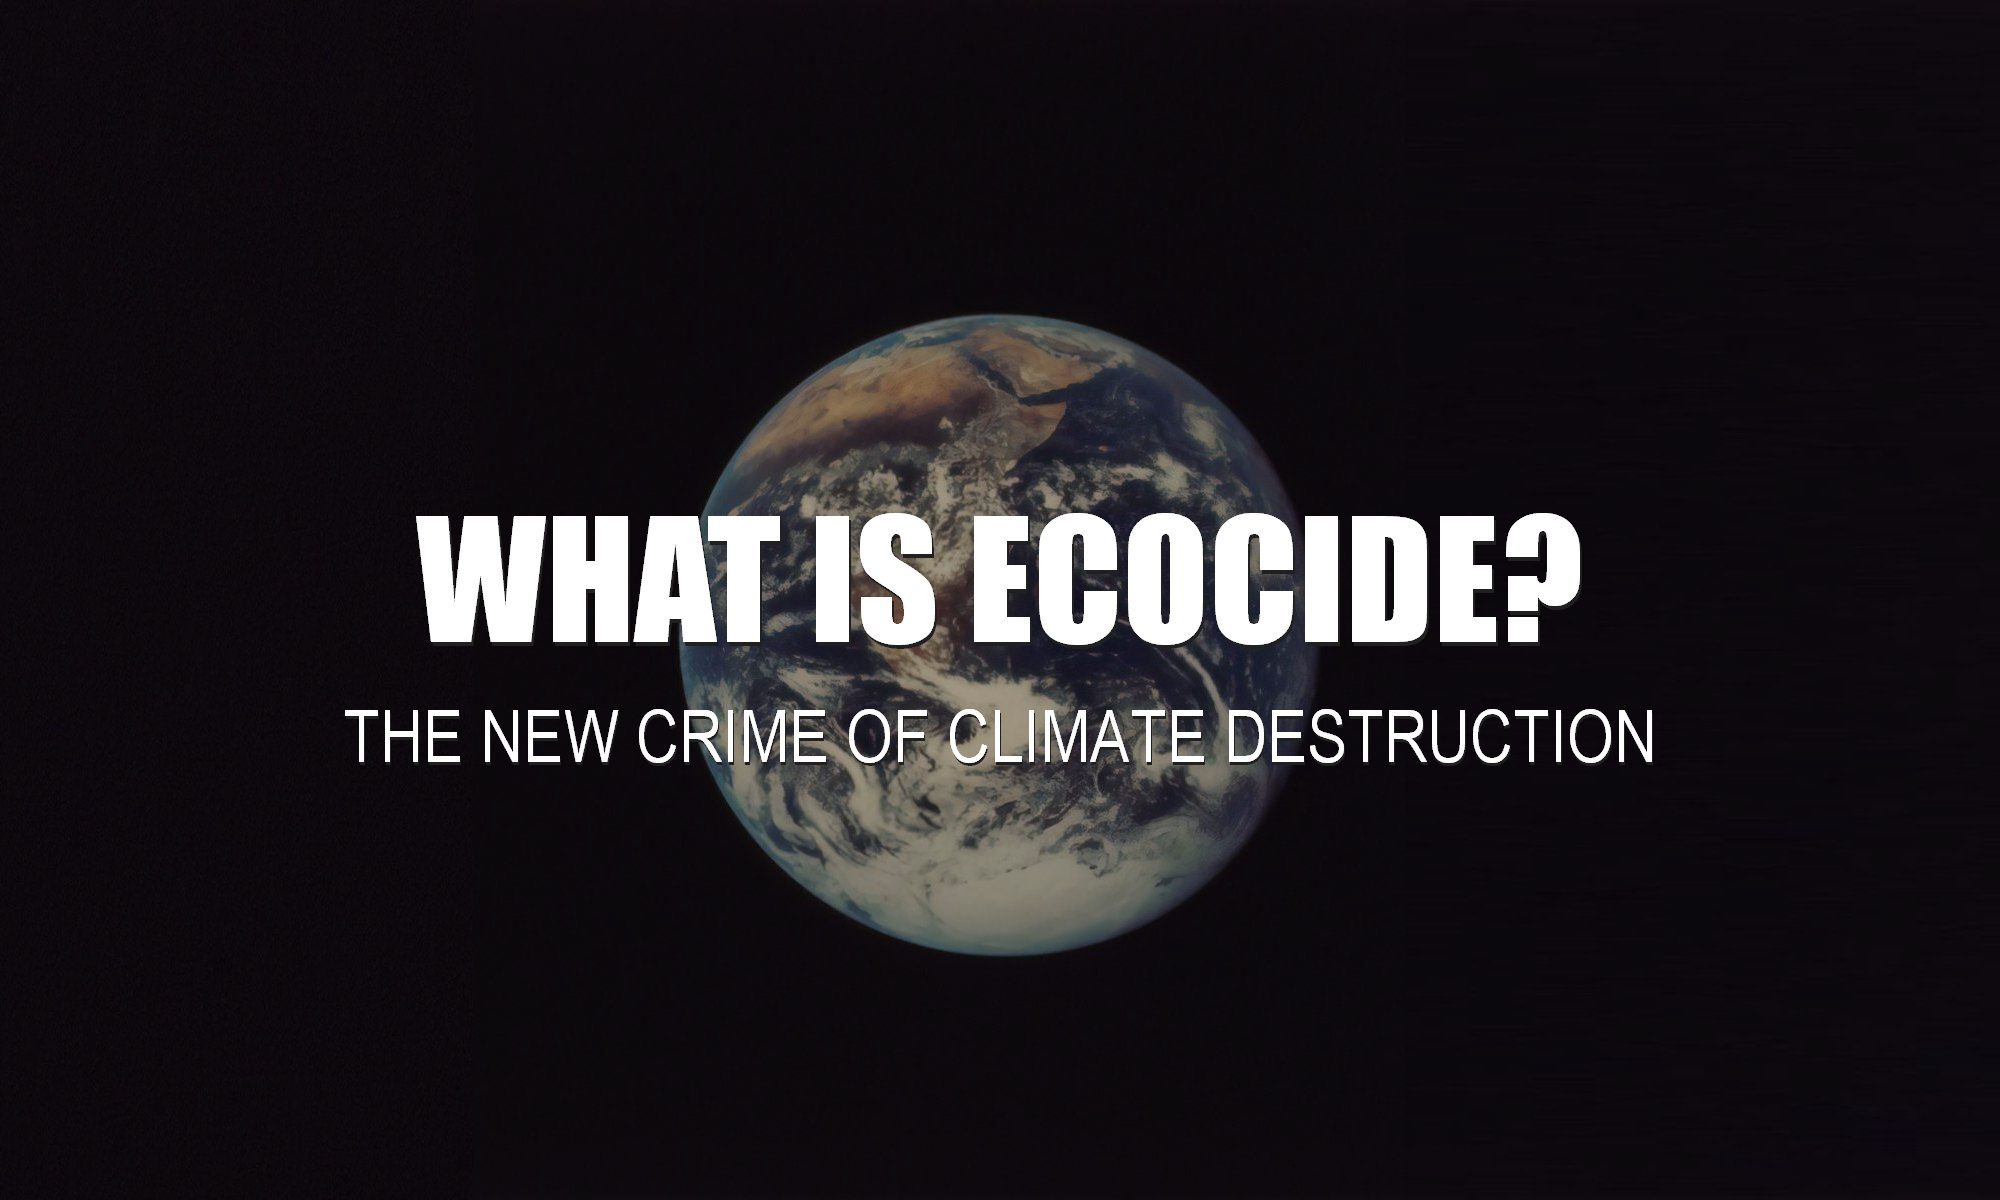 What is Ecocide? What is the international environmental crime climate destruction